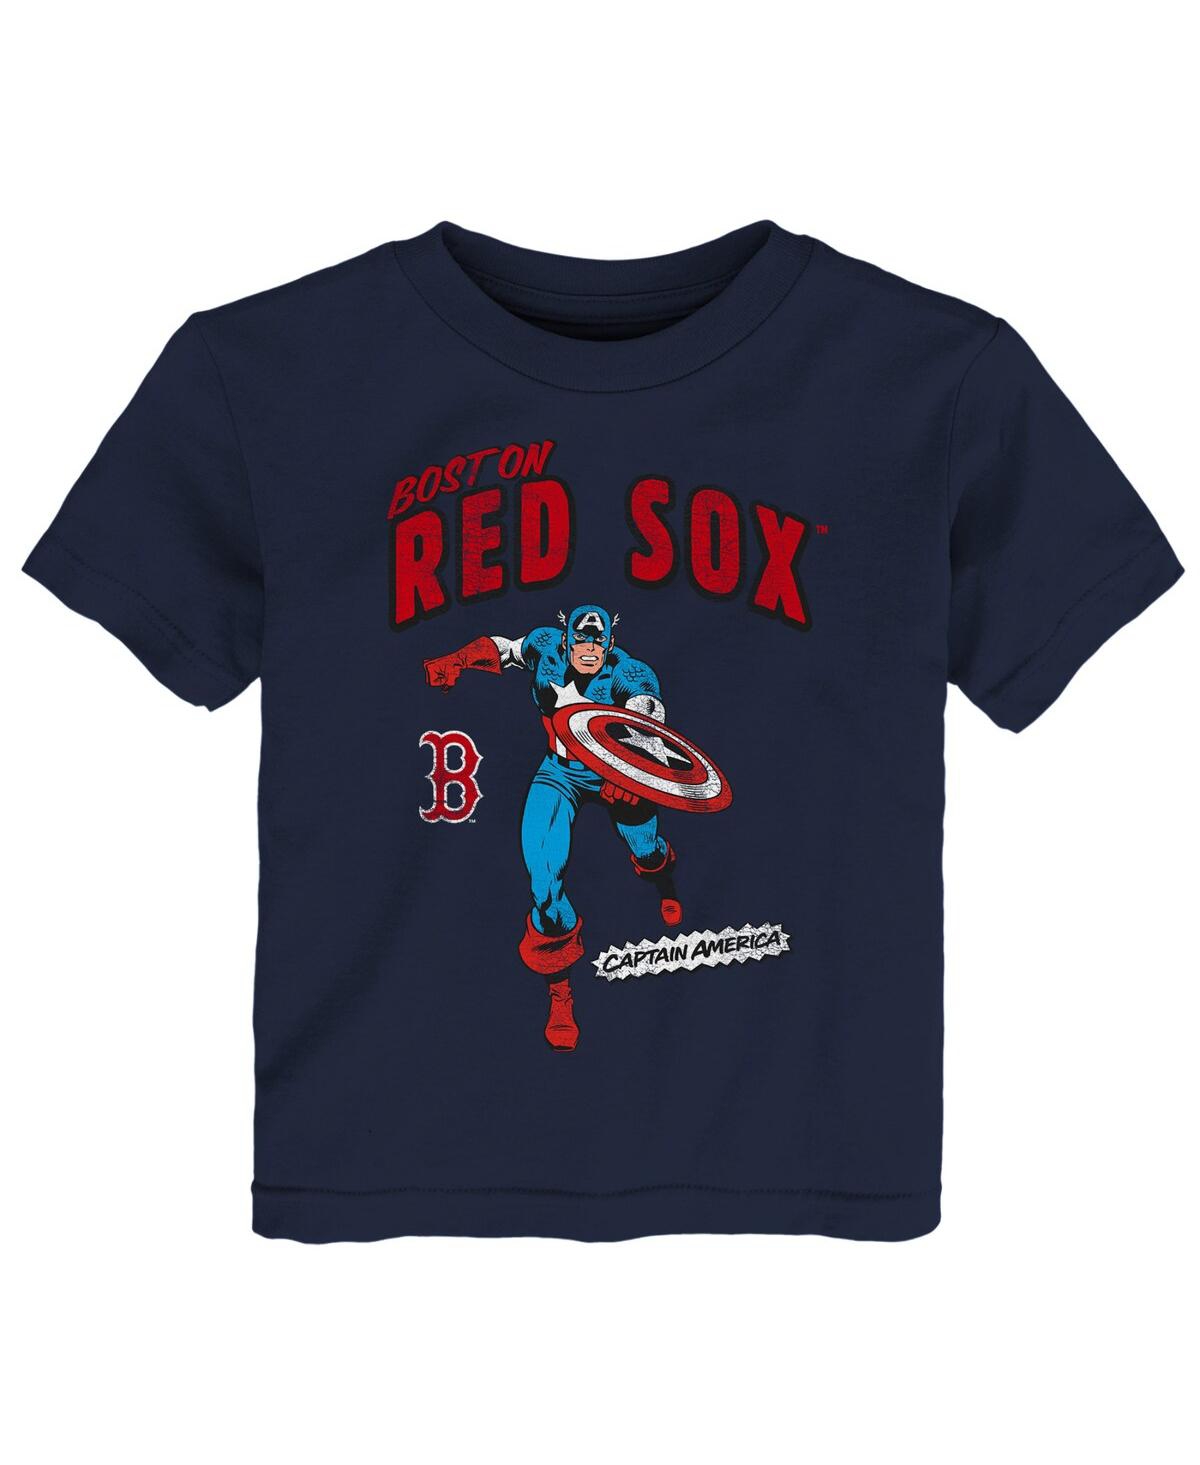 Outerstuff Babies' Toddler Boys And Girls Navy Boston Red Sox Team Captain America Marvel T-shirt